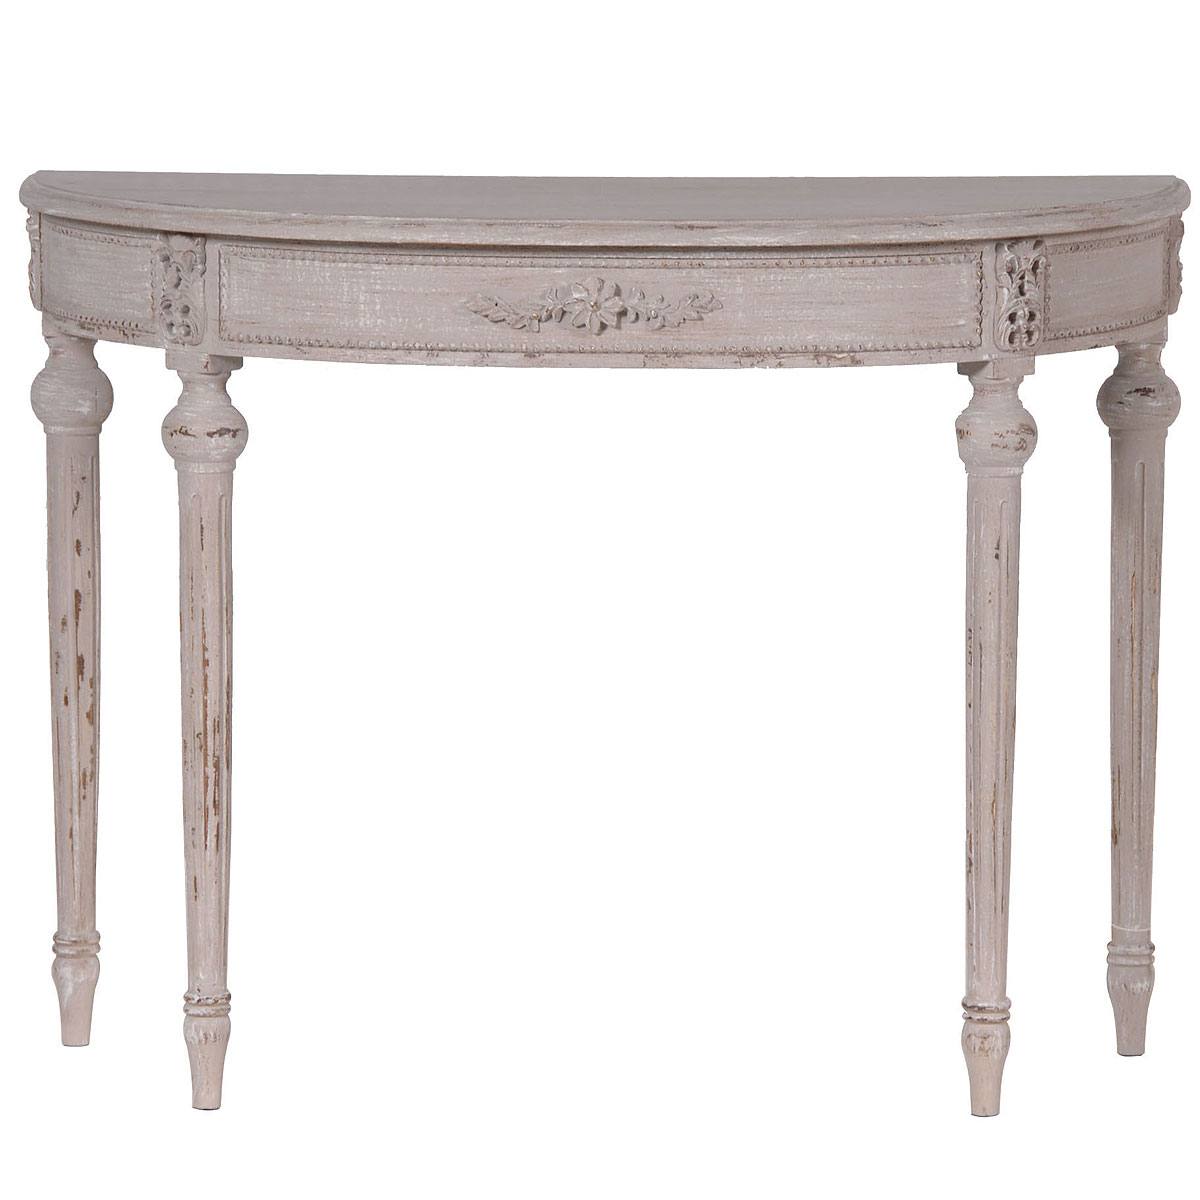 grey half moon console table french bedroom company hooker furniture white accent espresso finish coffee turquoise square end with drawer large modern dale tiffany ceiling lights